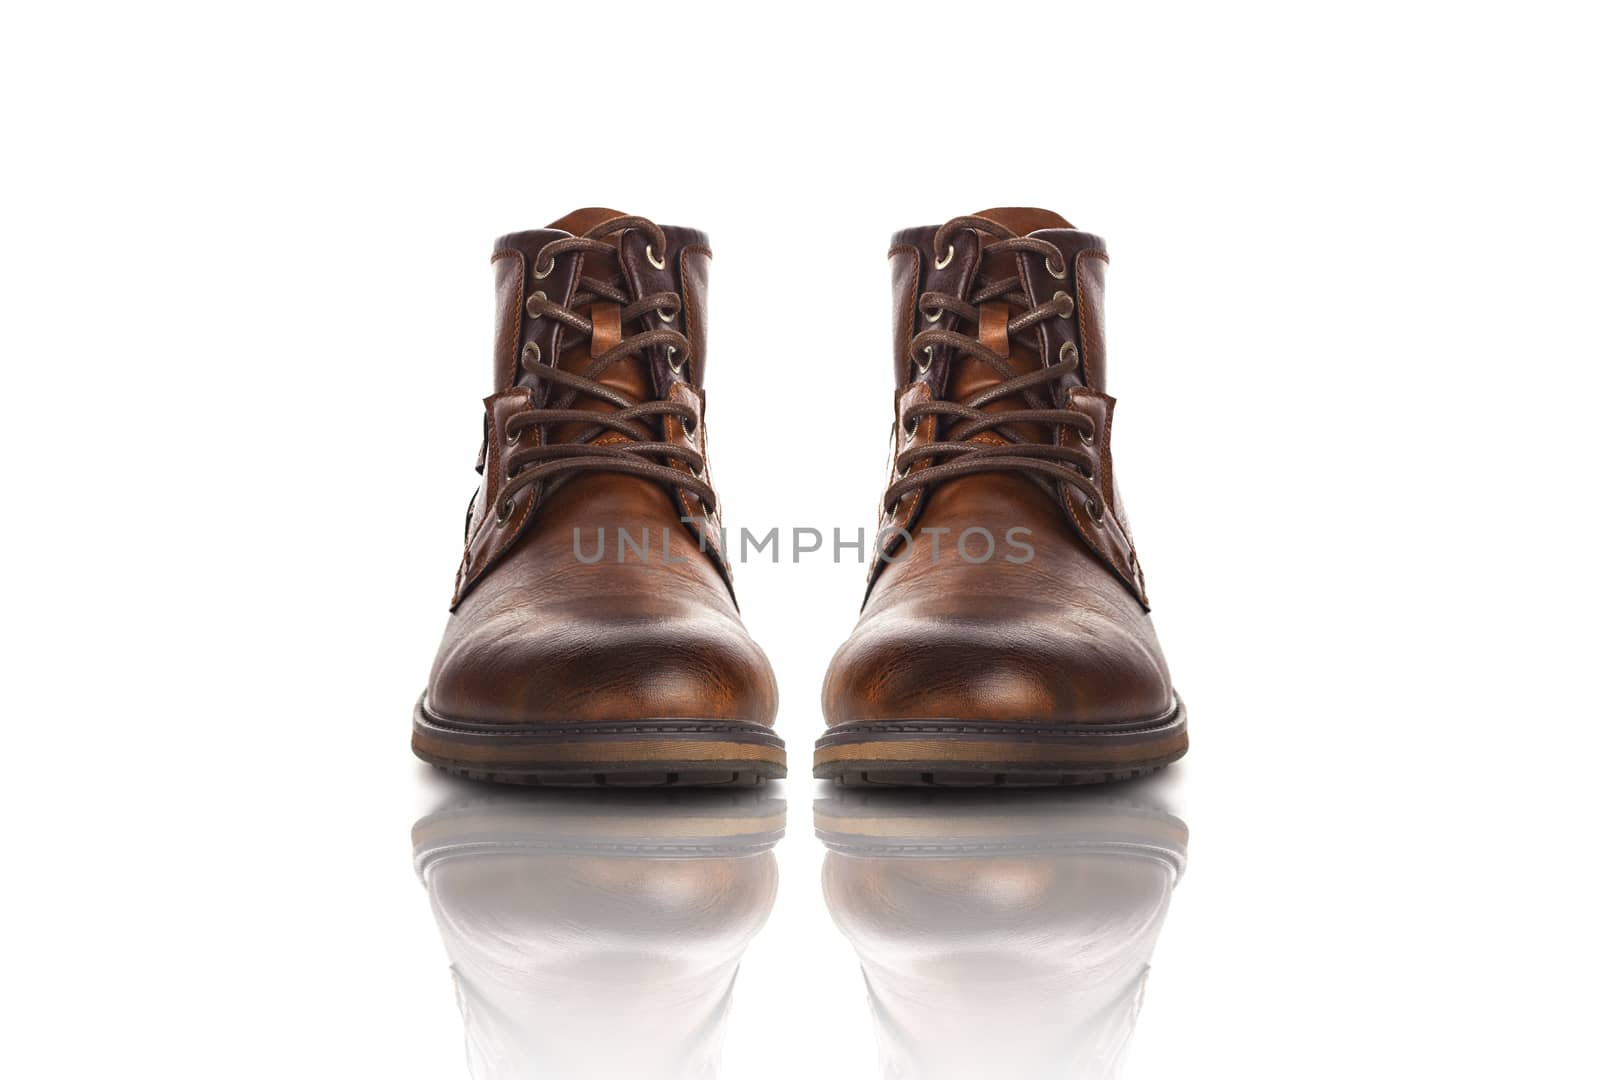 Men's shoes brown color casual. Isolated on white background